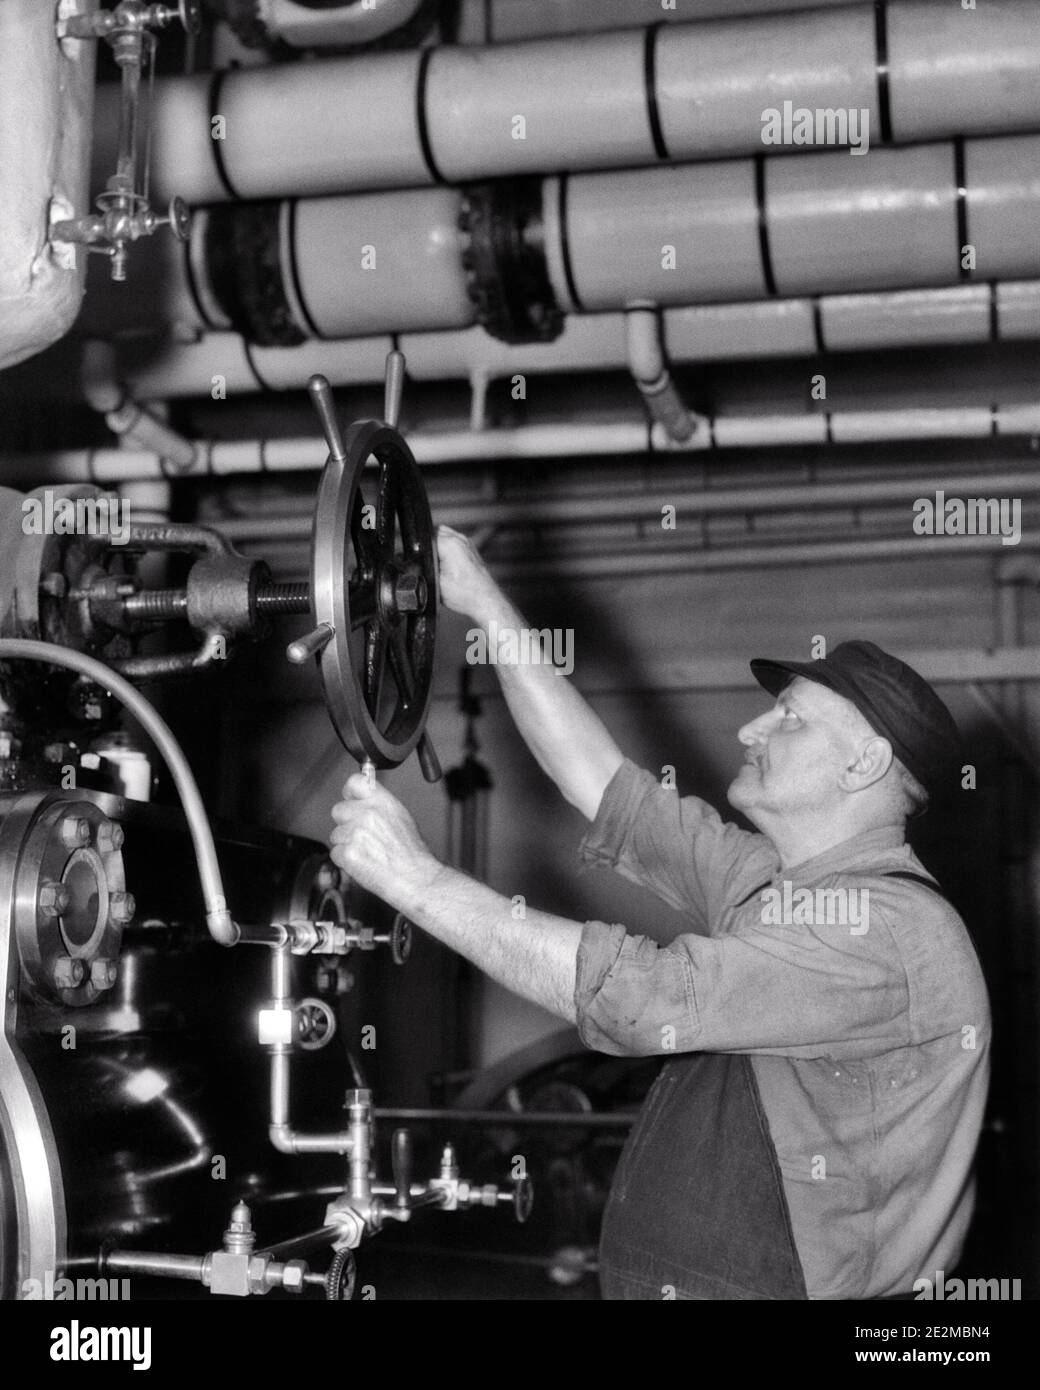 1930s MATURE MAN WORKER REGULATING STEAM PRESSURE OR FLOW BY TURNING THE WHEEL-LIKE HANDLE ON A STEAM VALVE - i1913 HAR001 HARS EMPLOYMENT OCCUPATIONS HANDLE EMPLOYEE OR FLOW BLACK AND WHITE CAUCASIAN ETHNICITY HAR001 LABORING OLD FASHIONED VALVE Stock Photo